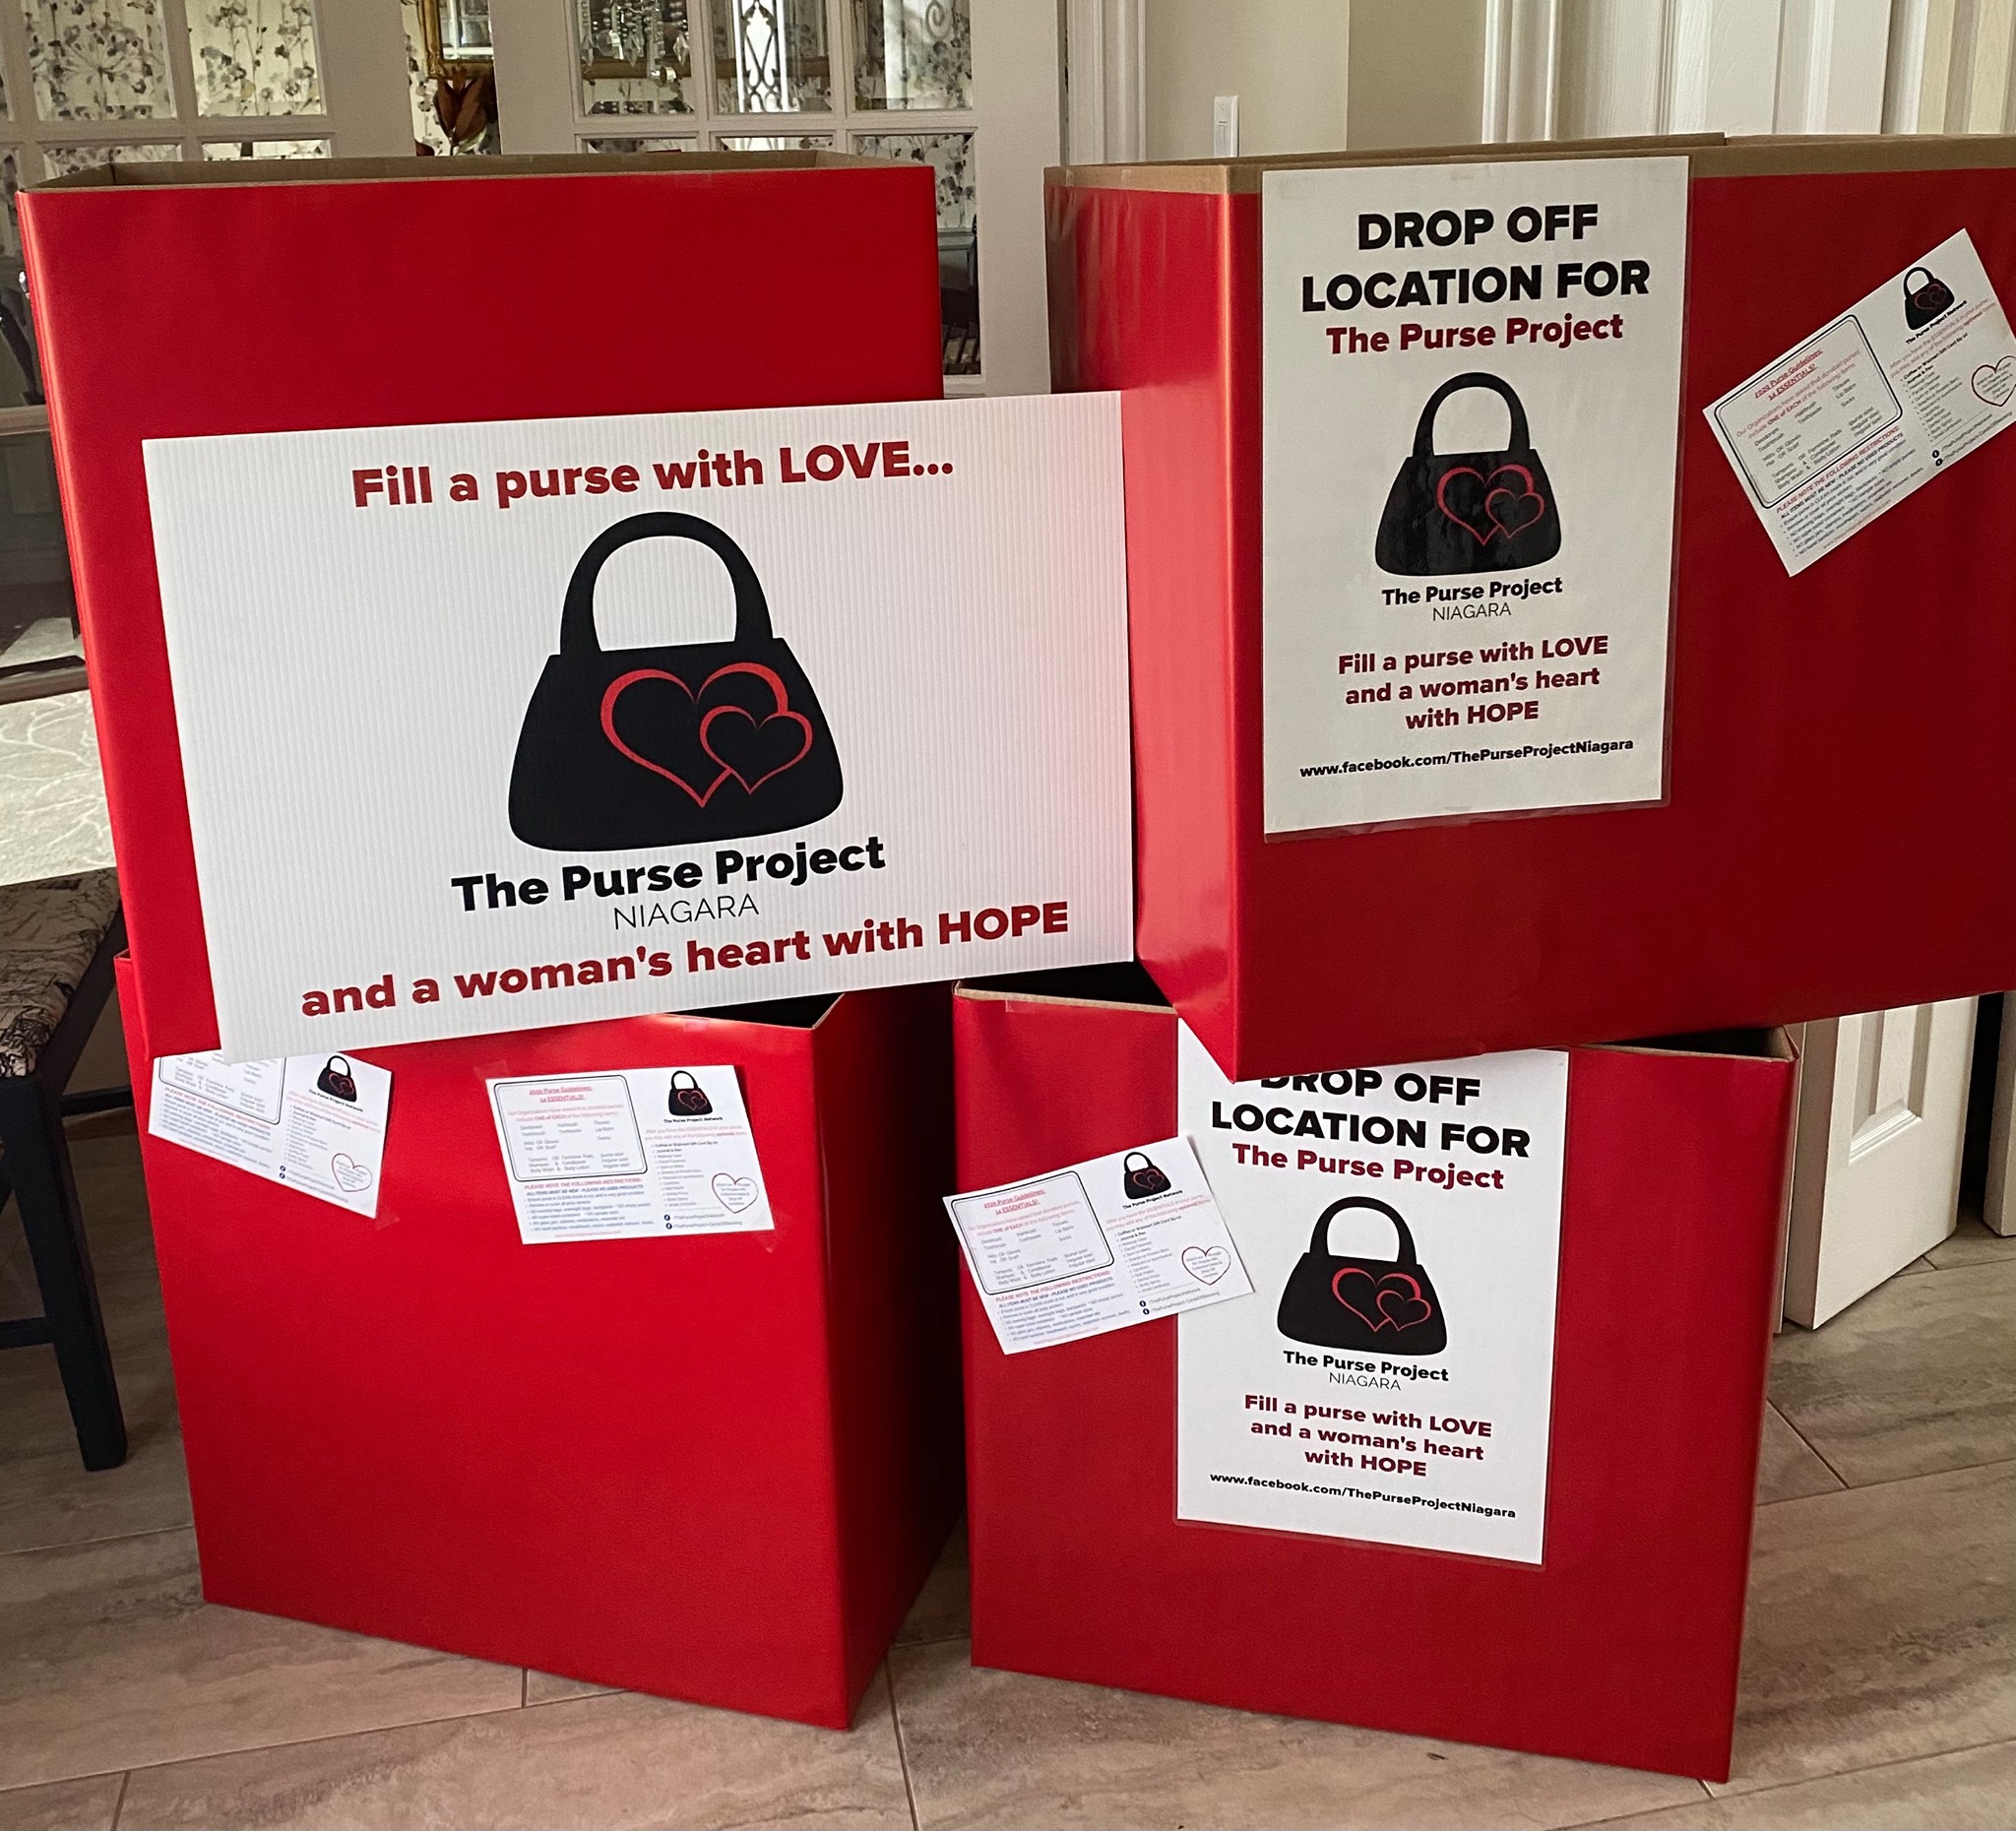 Get Involved with The Purse Project Network!